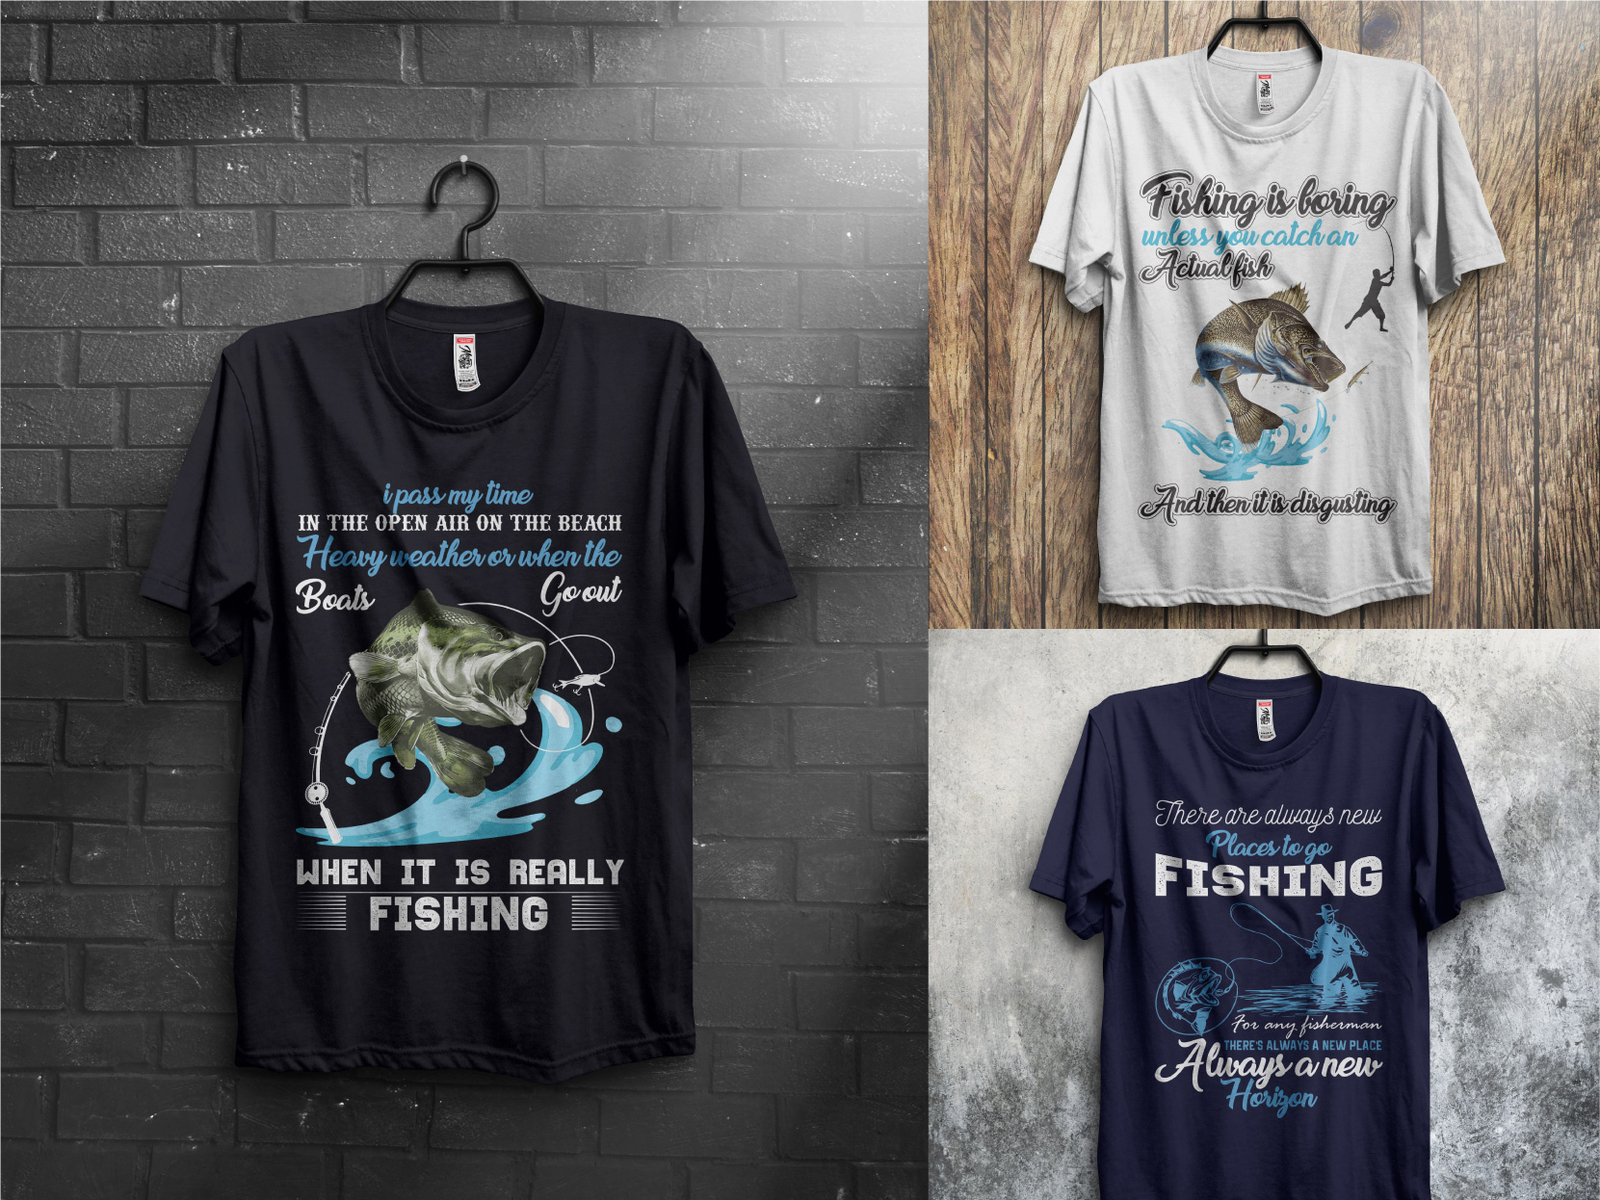 There Are Always New Places To Go Fishing For Any Fisherman Shirt